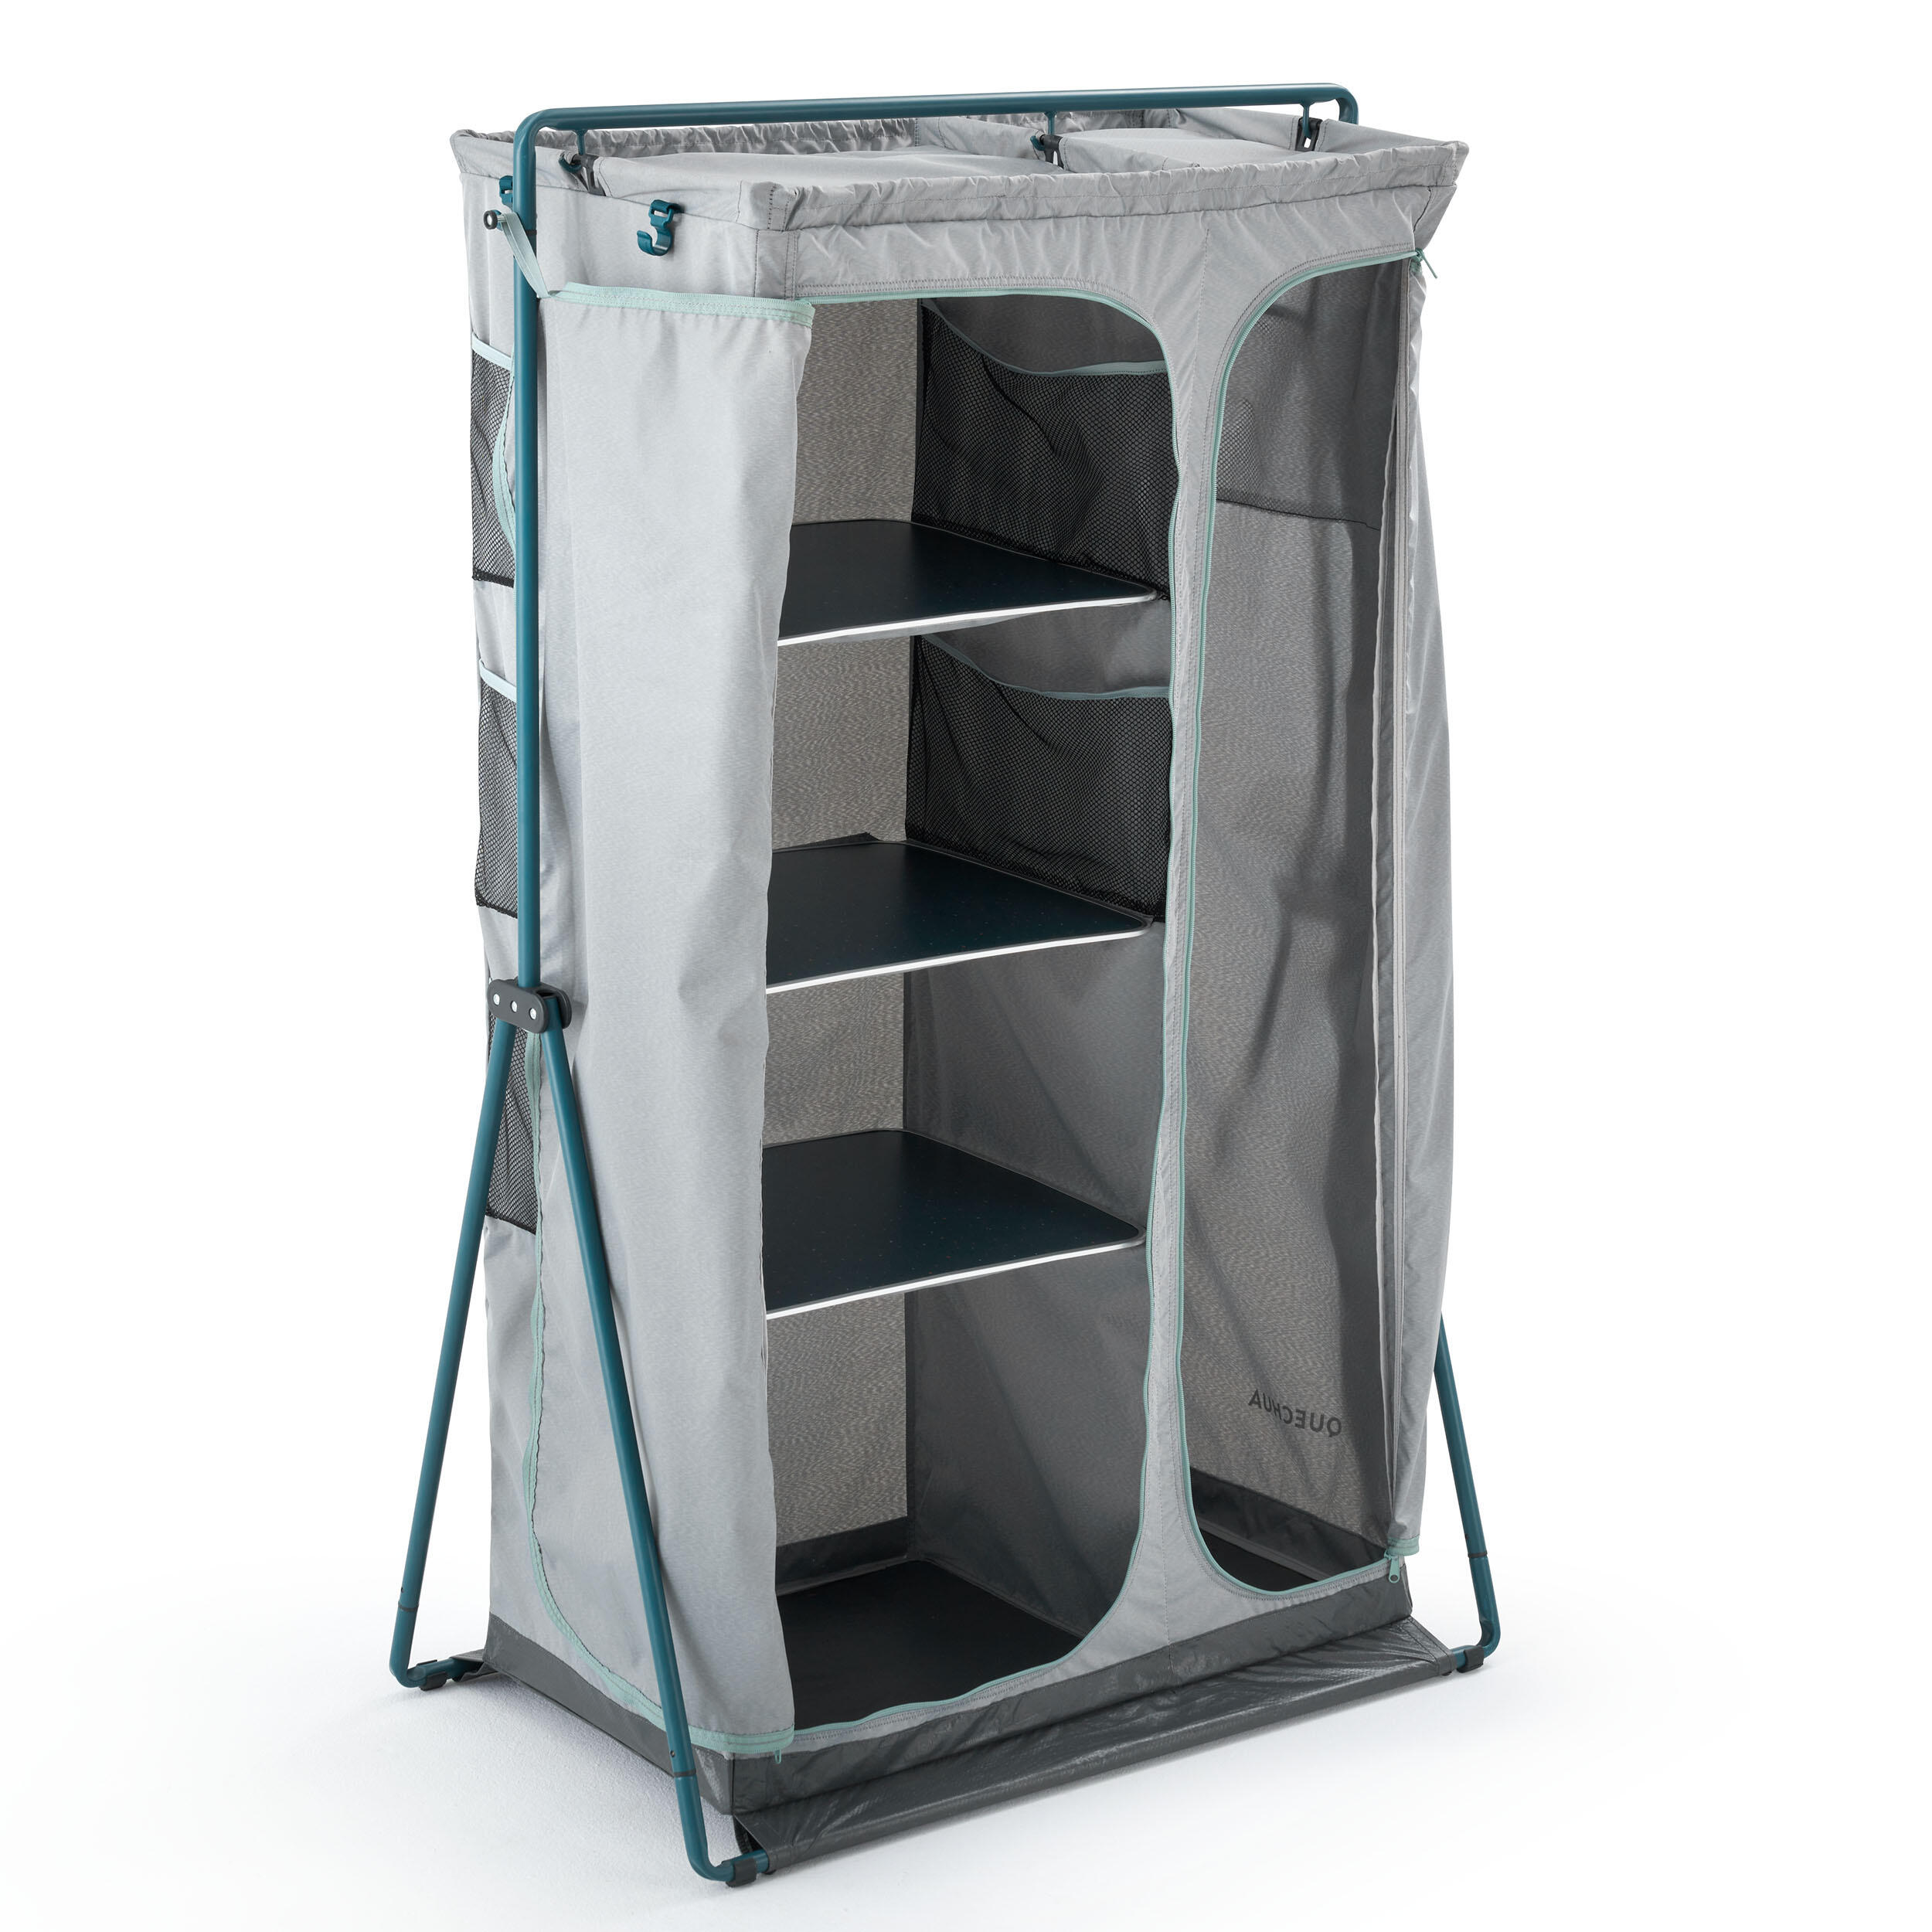 QUECHUA Large folding and compact camping wardrobe - Comfort